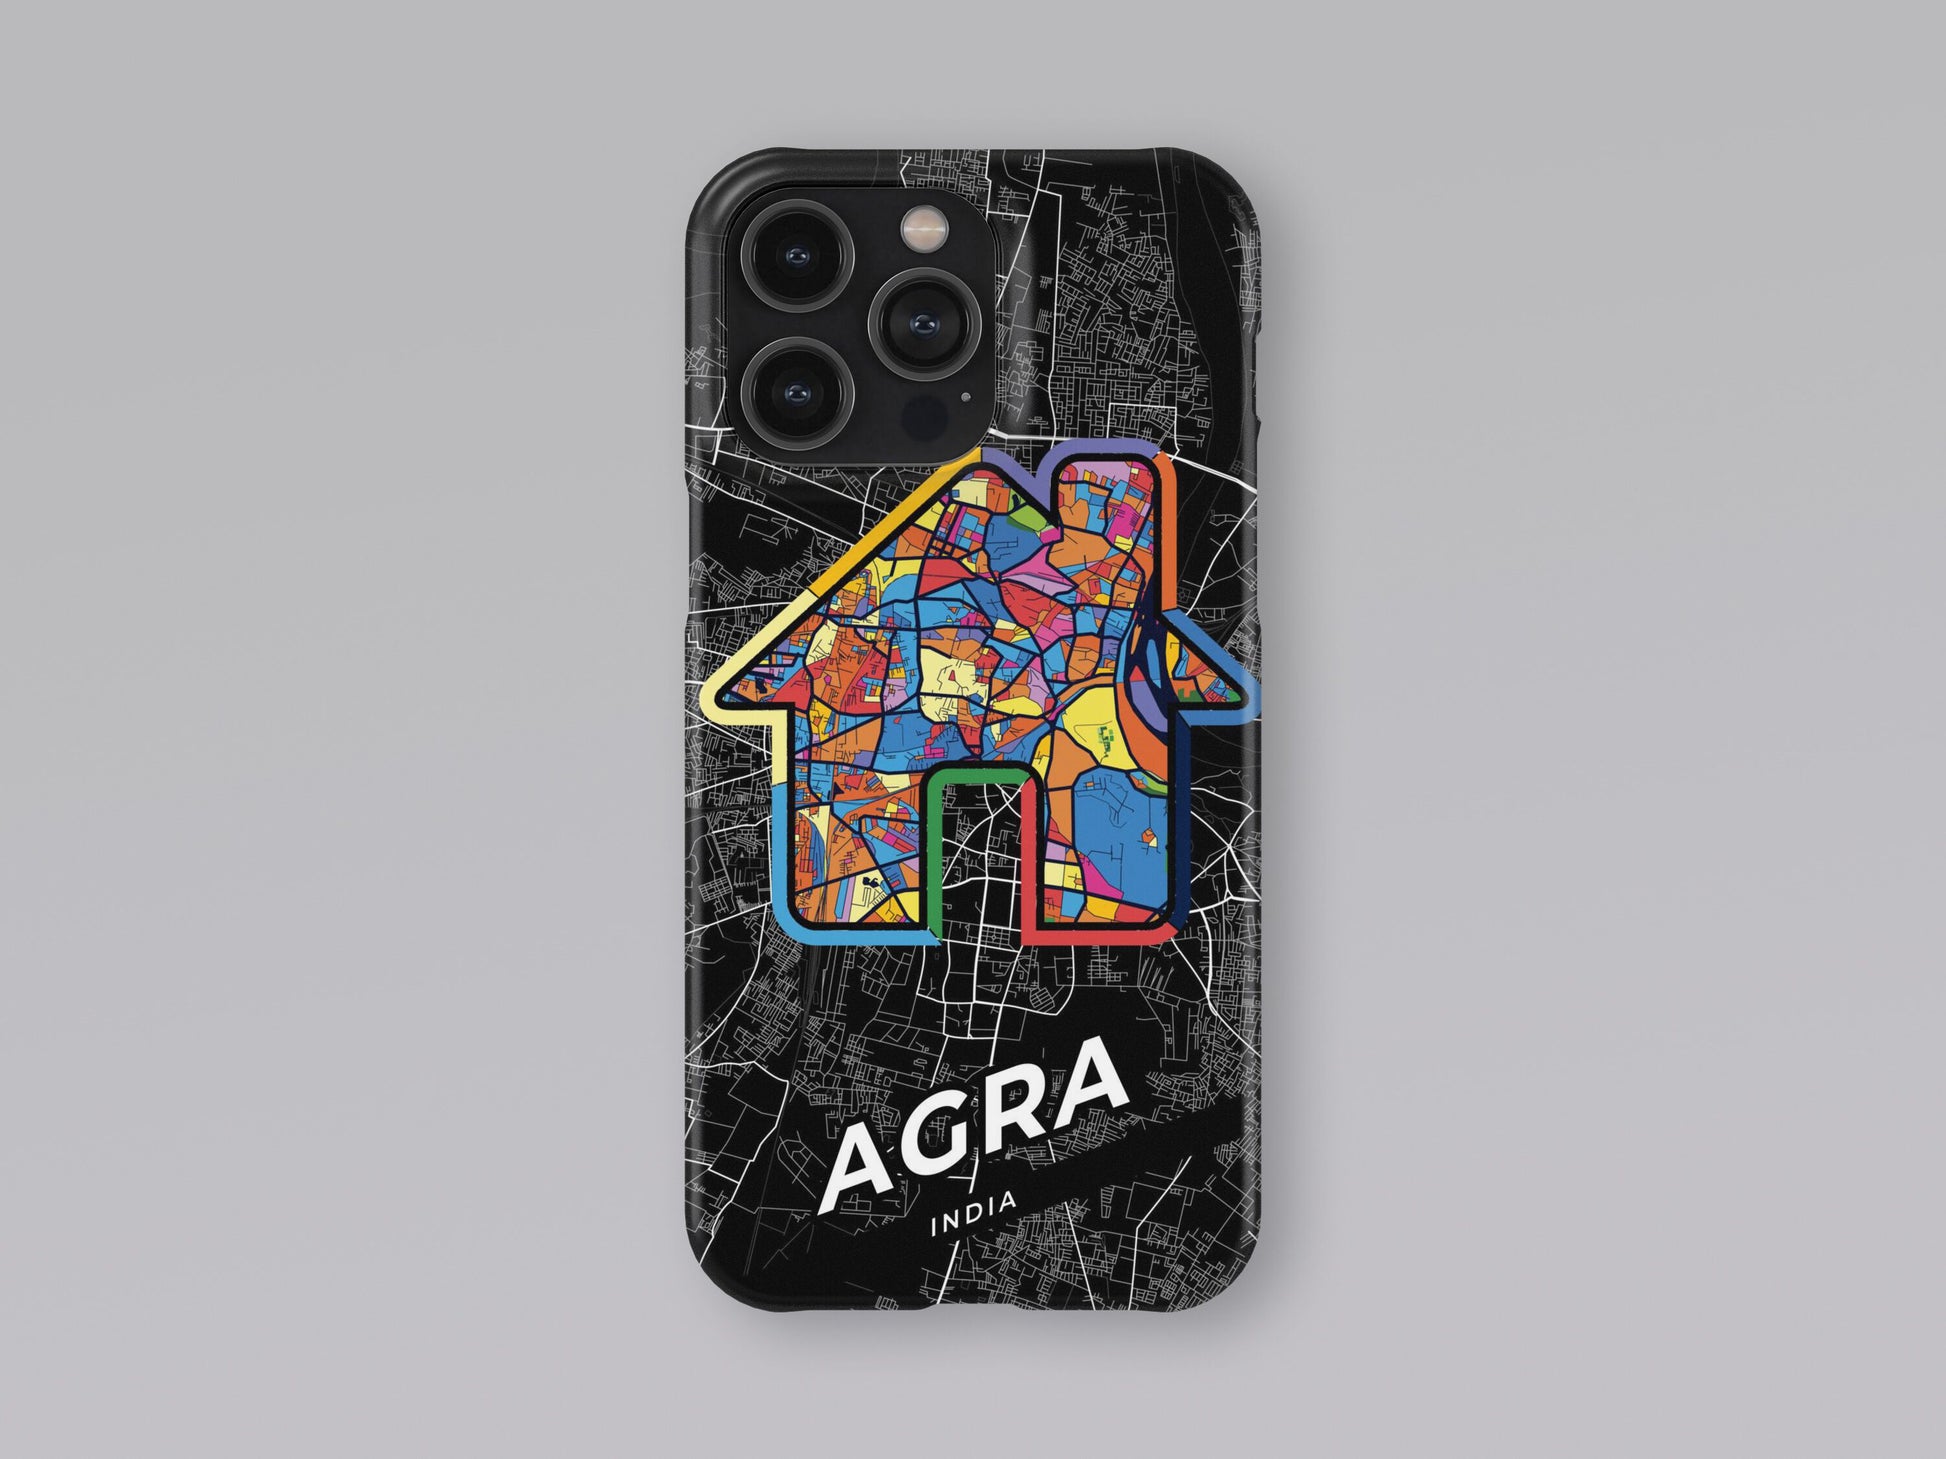 Agra India slim phone case with colorful icon. Birthday, wedding or housewarming gift. Couple match cases. 3